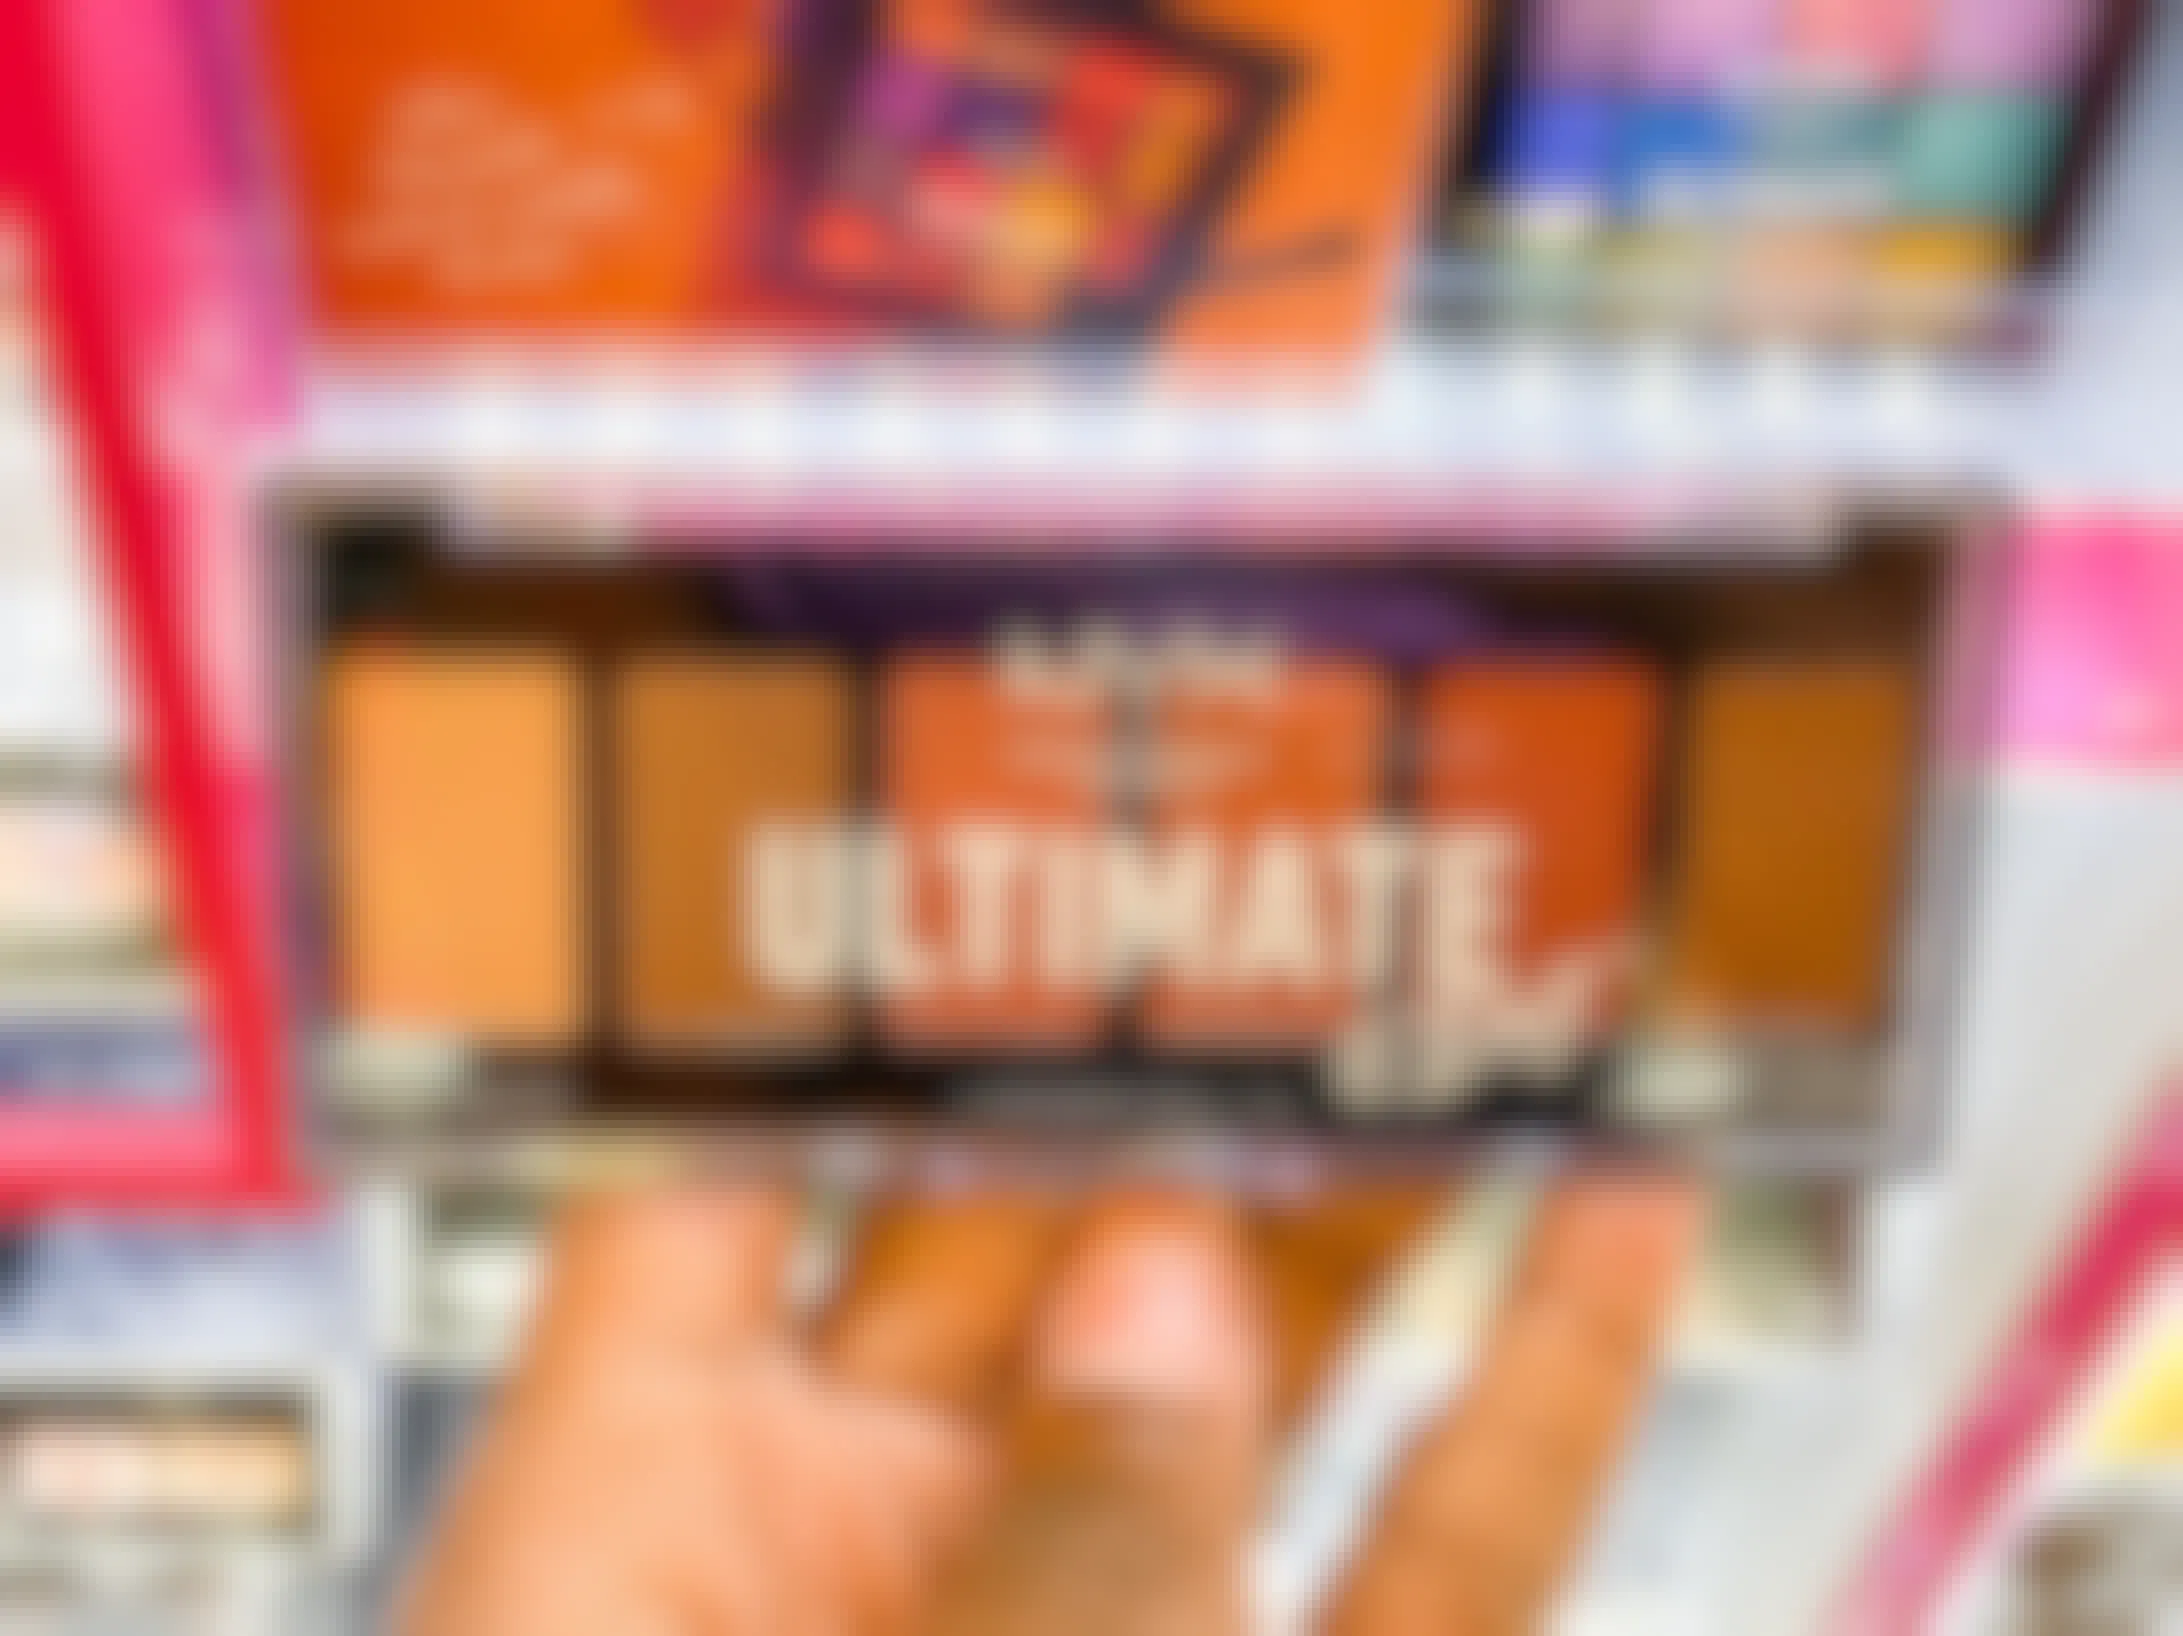 A person's hand holding NYX ultimate edit eyeshadow palette in Ulta.